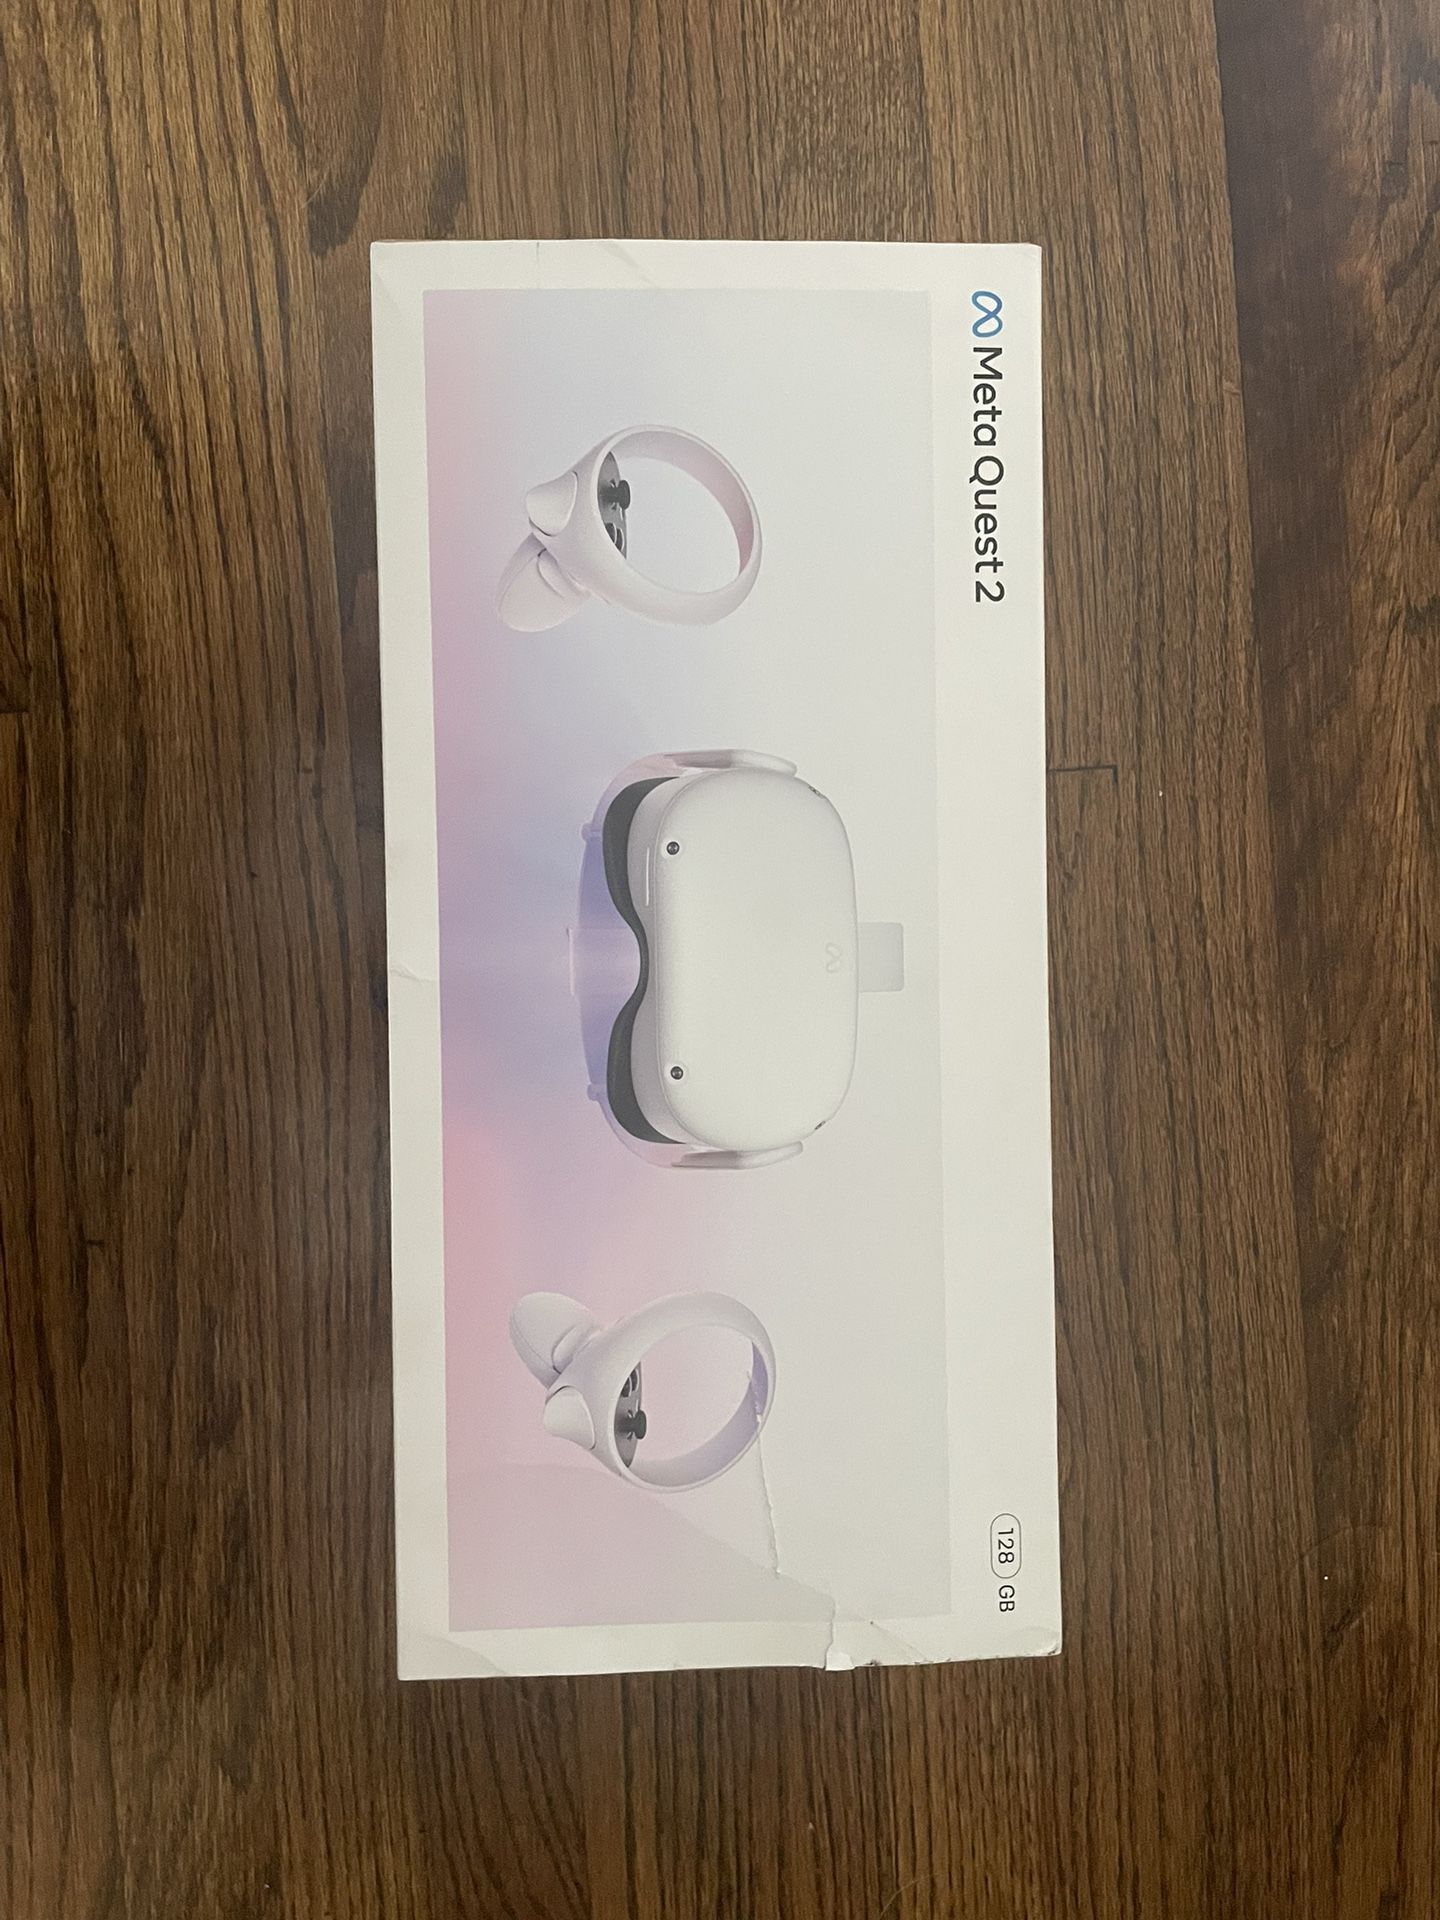 Meta Quest 2 Advanced All-in-one VR Headset - 128GB 